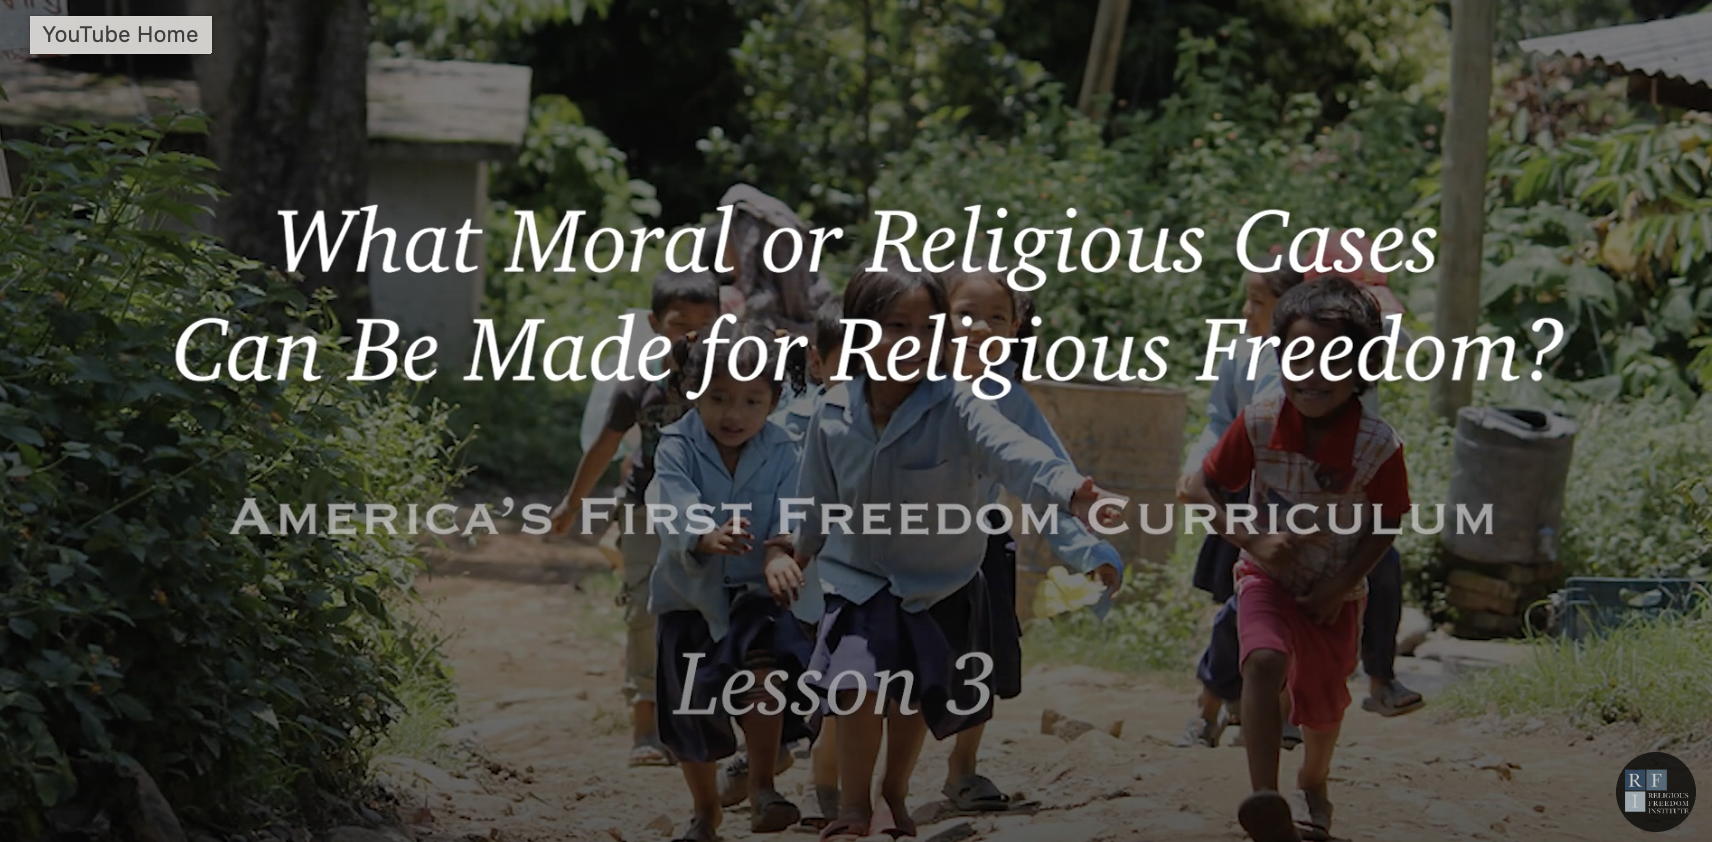 Featured image for “America’s First Freedom Curriculum Series | Video 15”